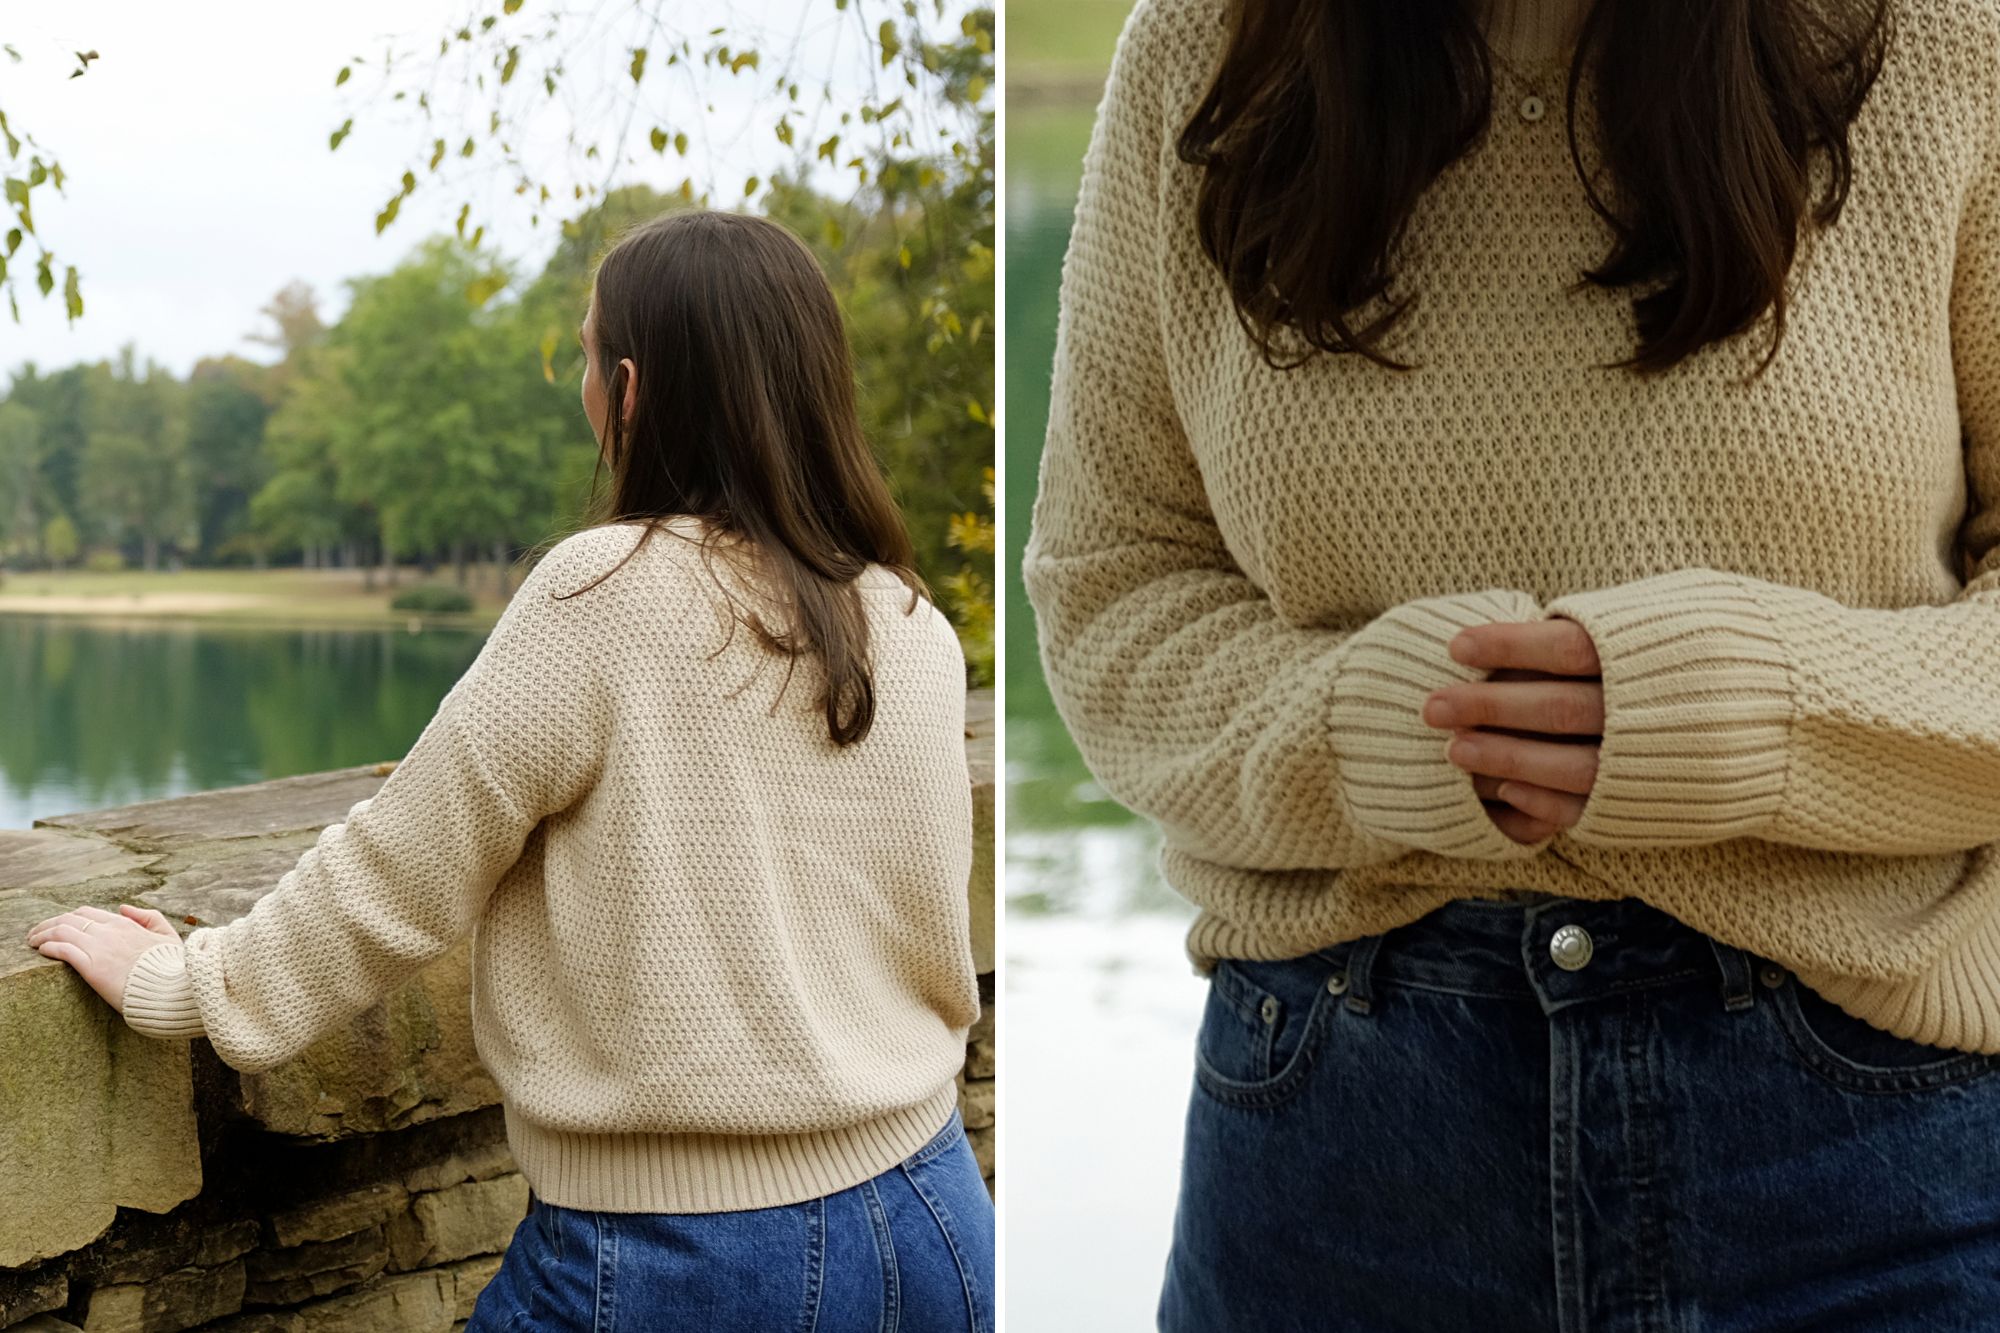 Alyssa wears the Honeycomb sweater from Pact with jeans and boots in two images